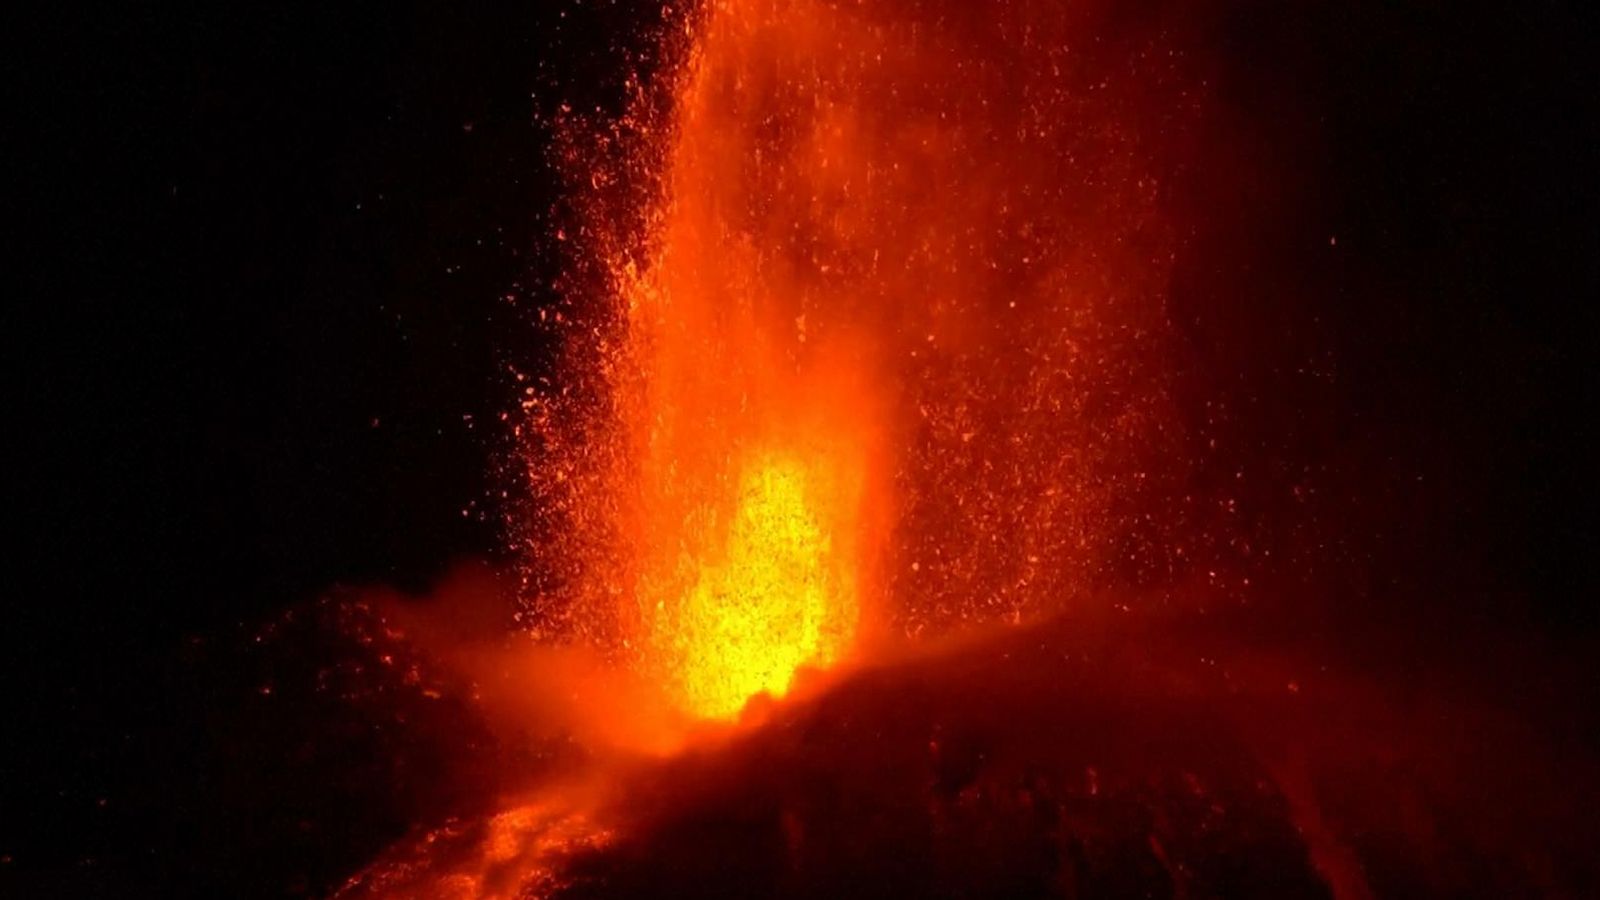 Mount Etna lights up night sky with spectacular eruptions World News